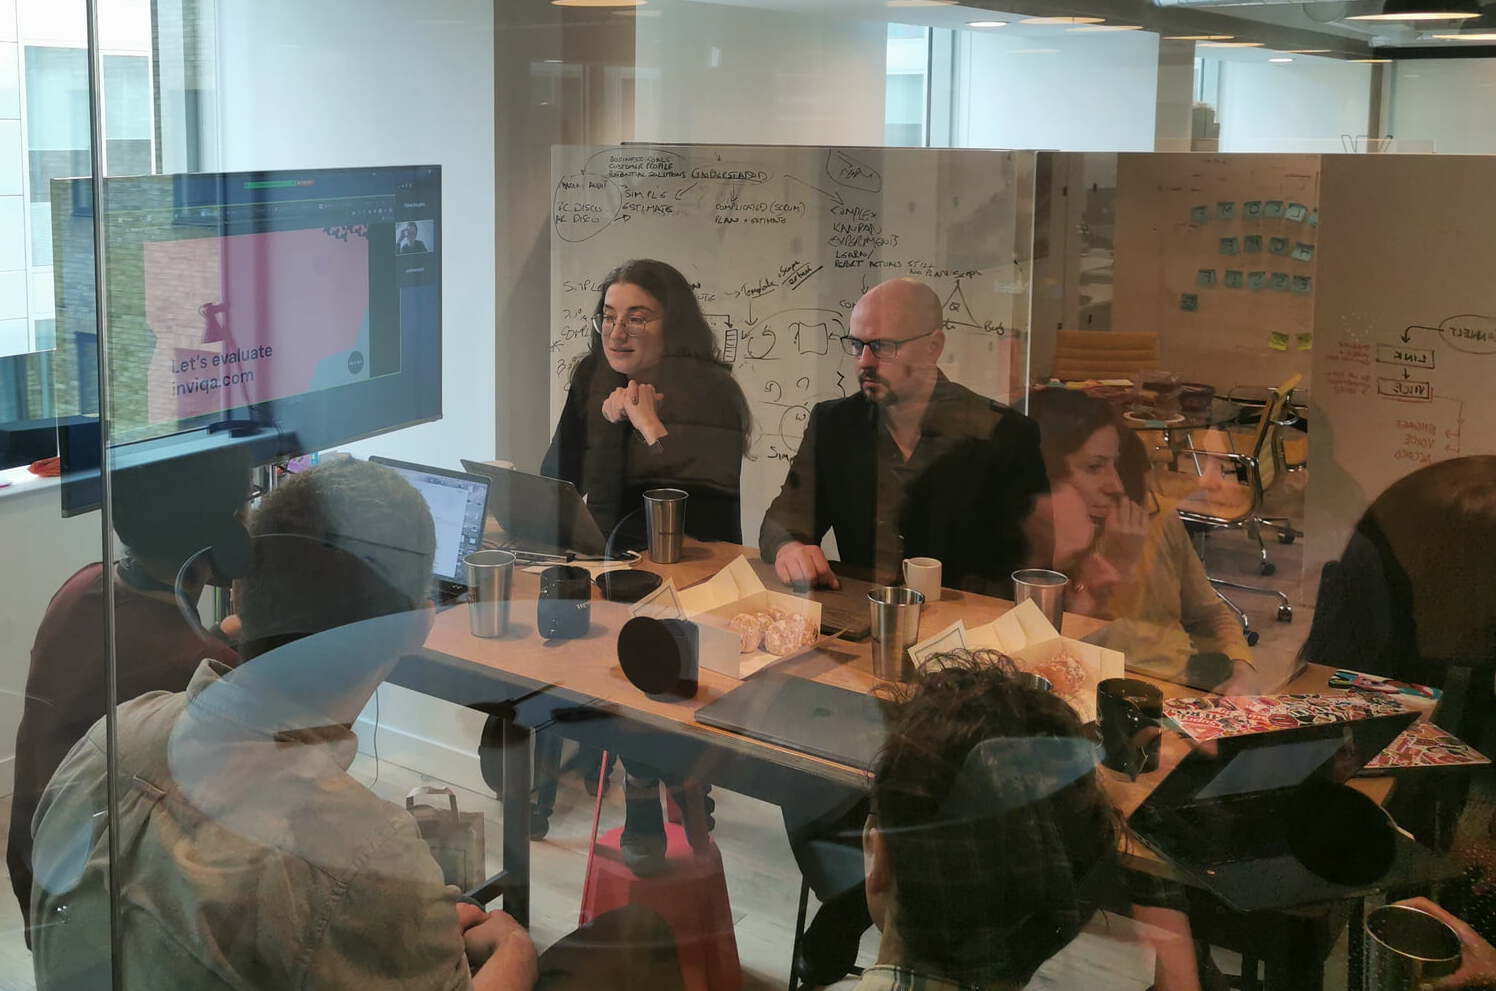 A through-the-window image of a meeting taking place in a glass room